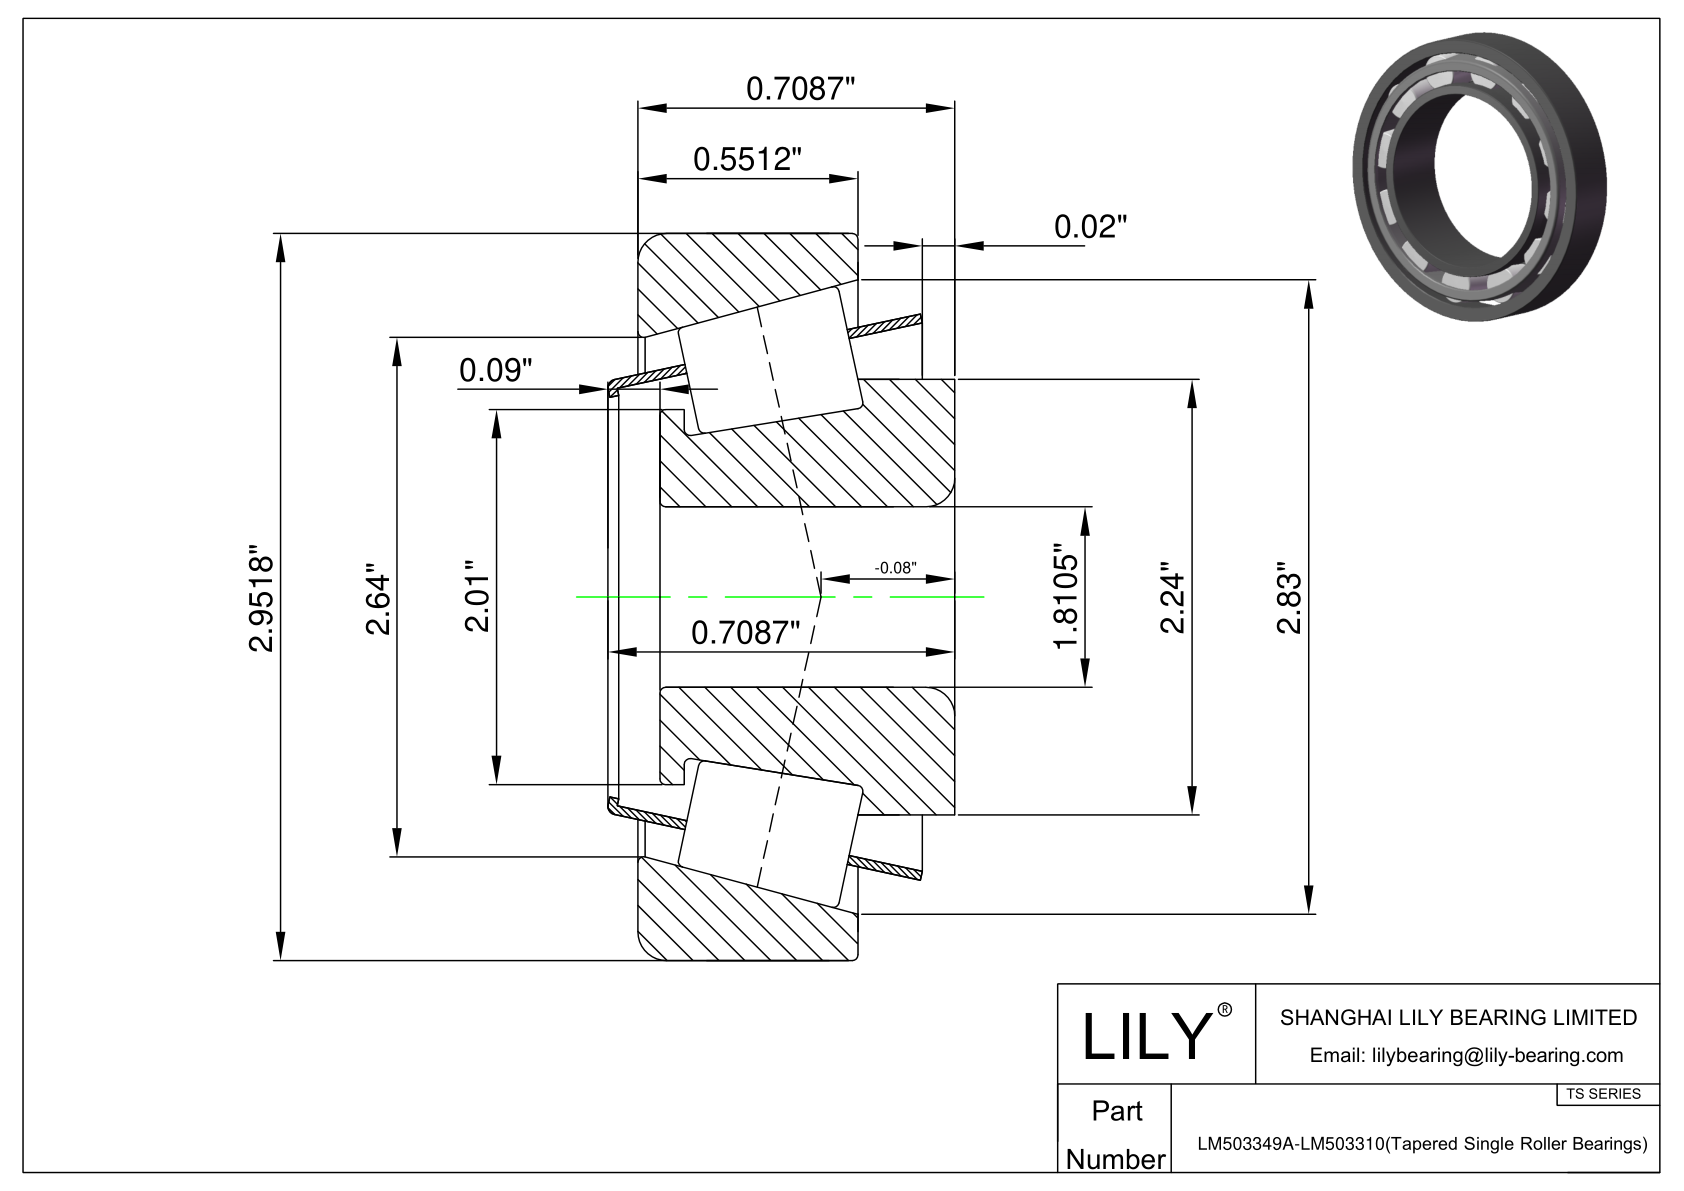 LM503349A-LM503310 TS (Tapered Single Roller Bearings) (Imperial) cad drawing